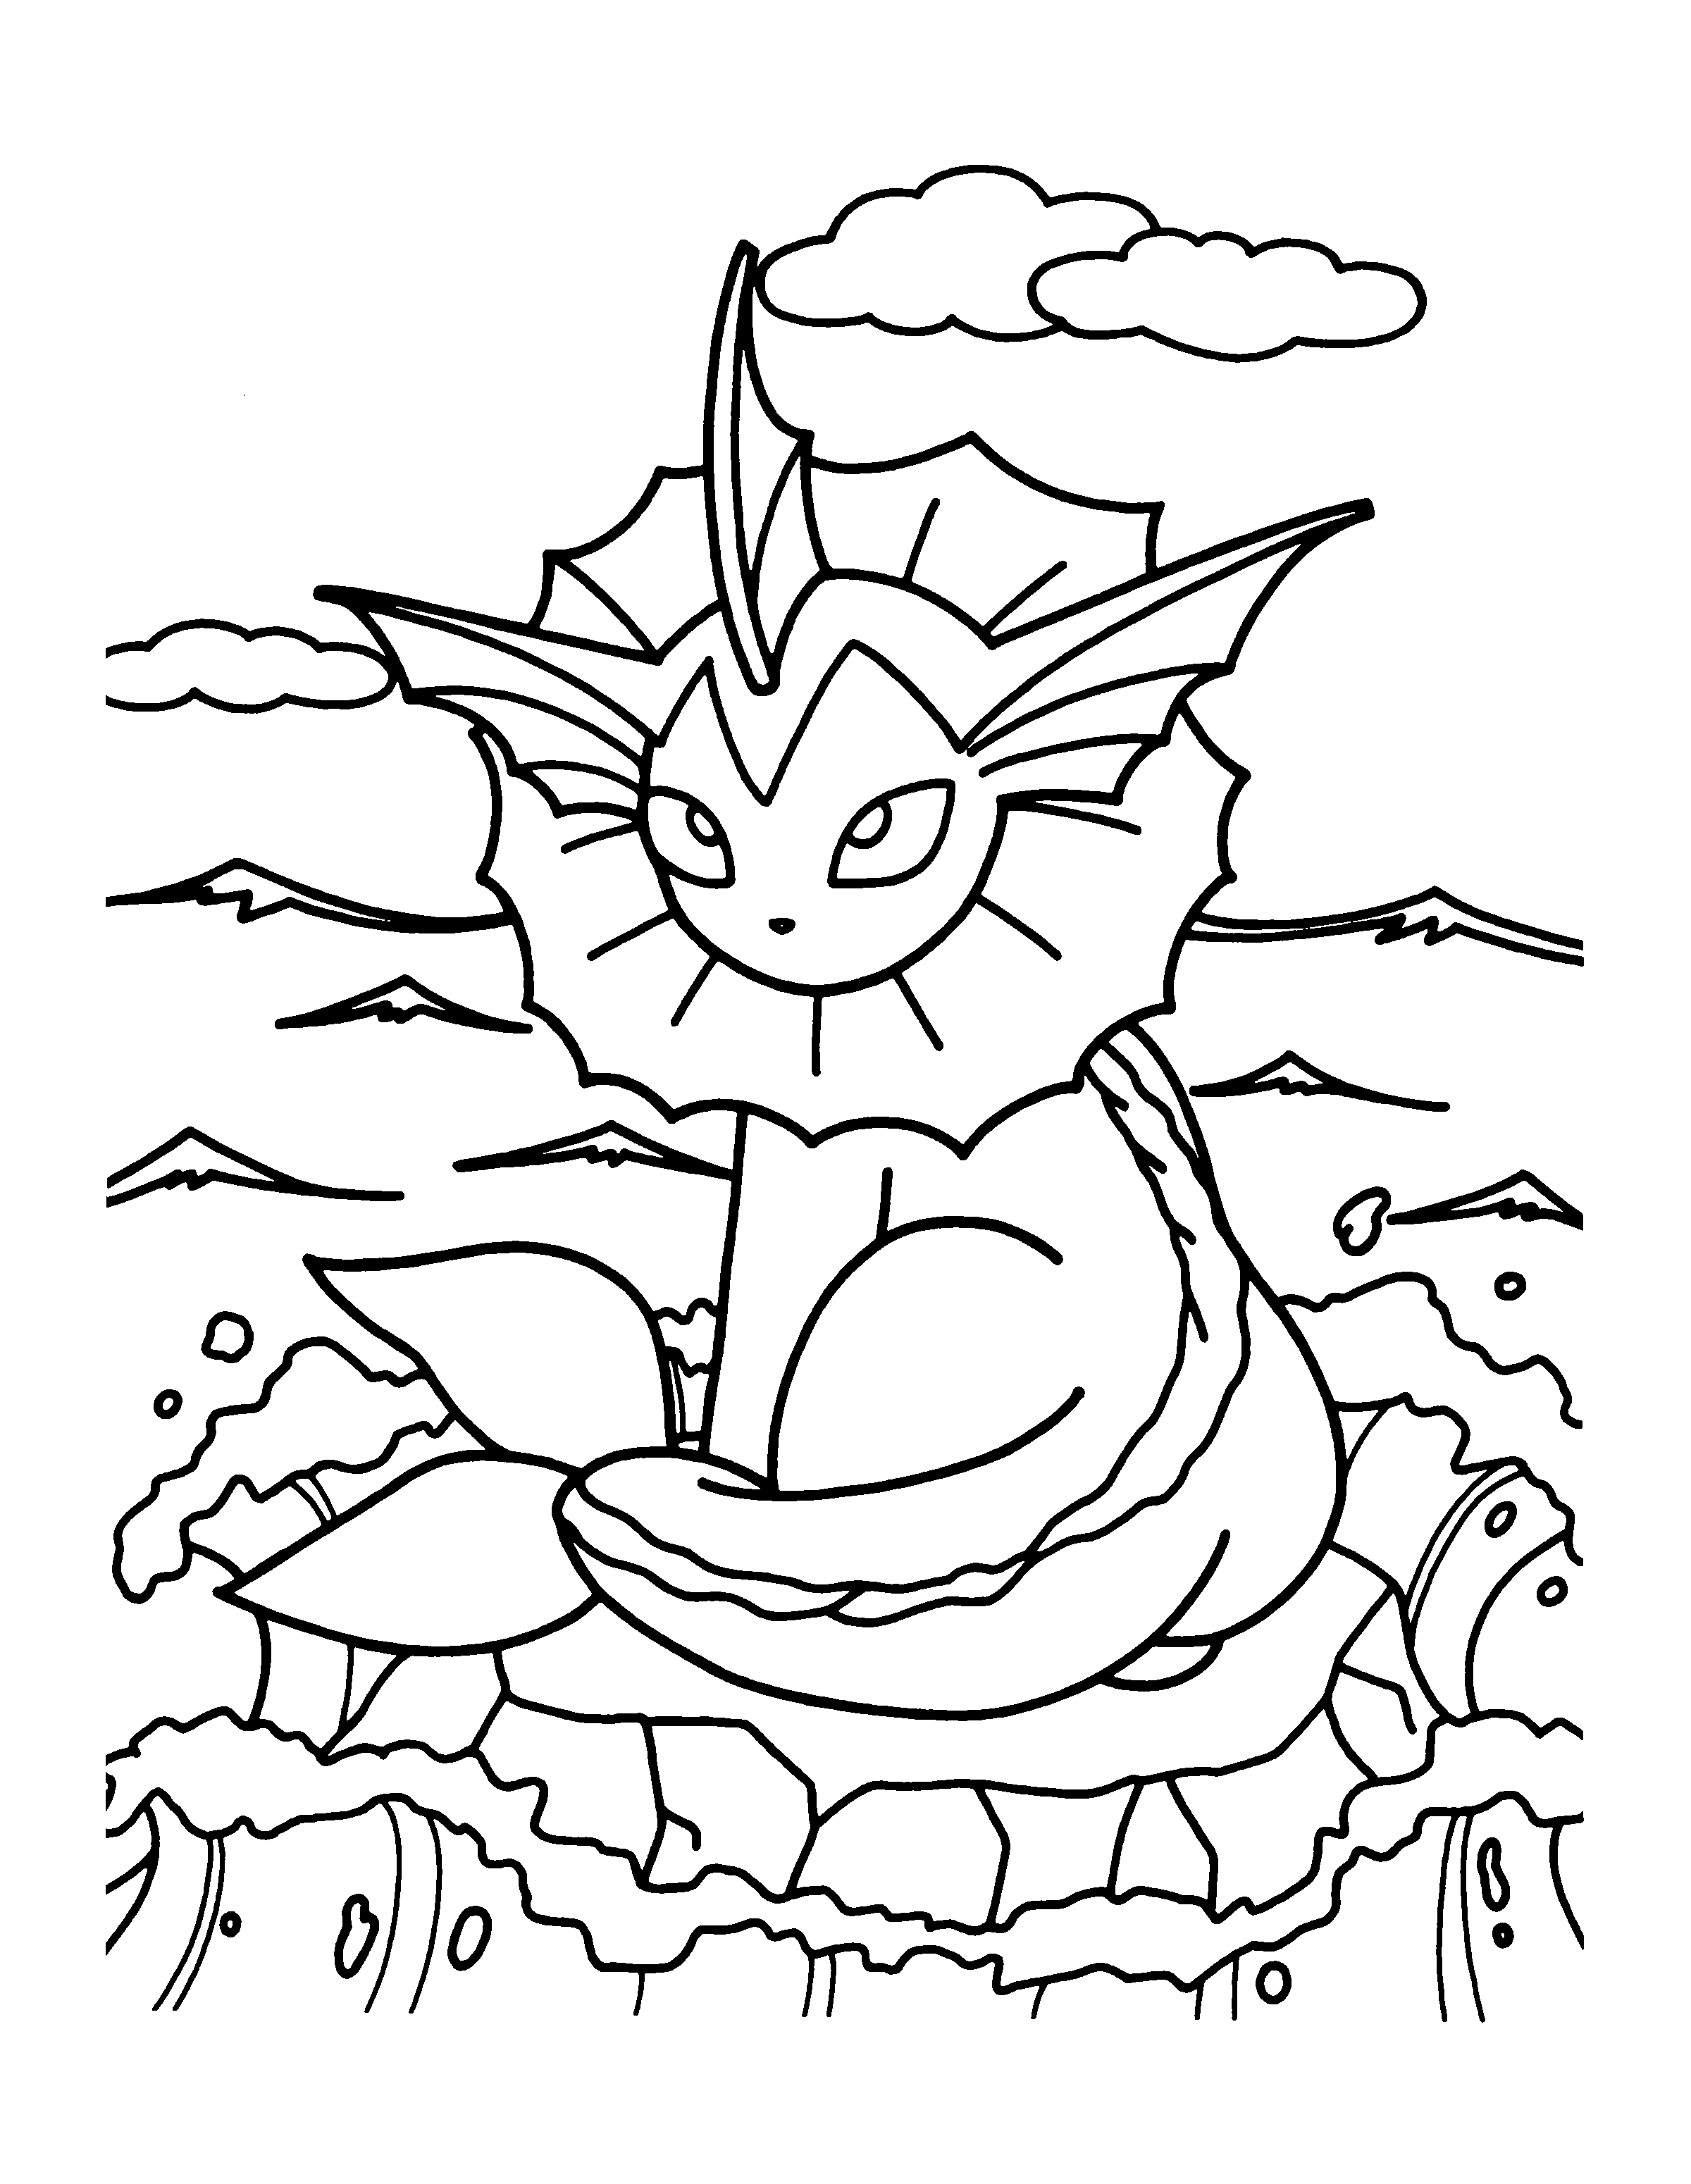 Free coloring pages of pokemon greninja